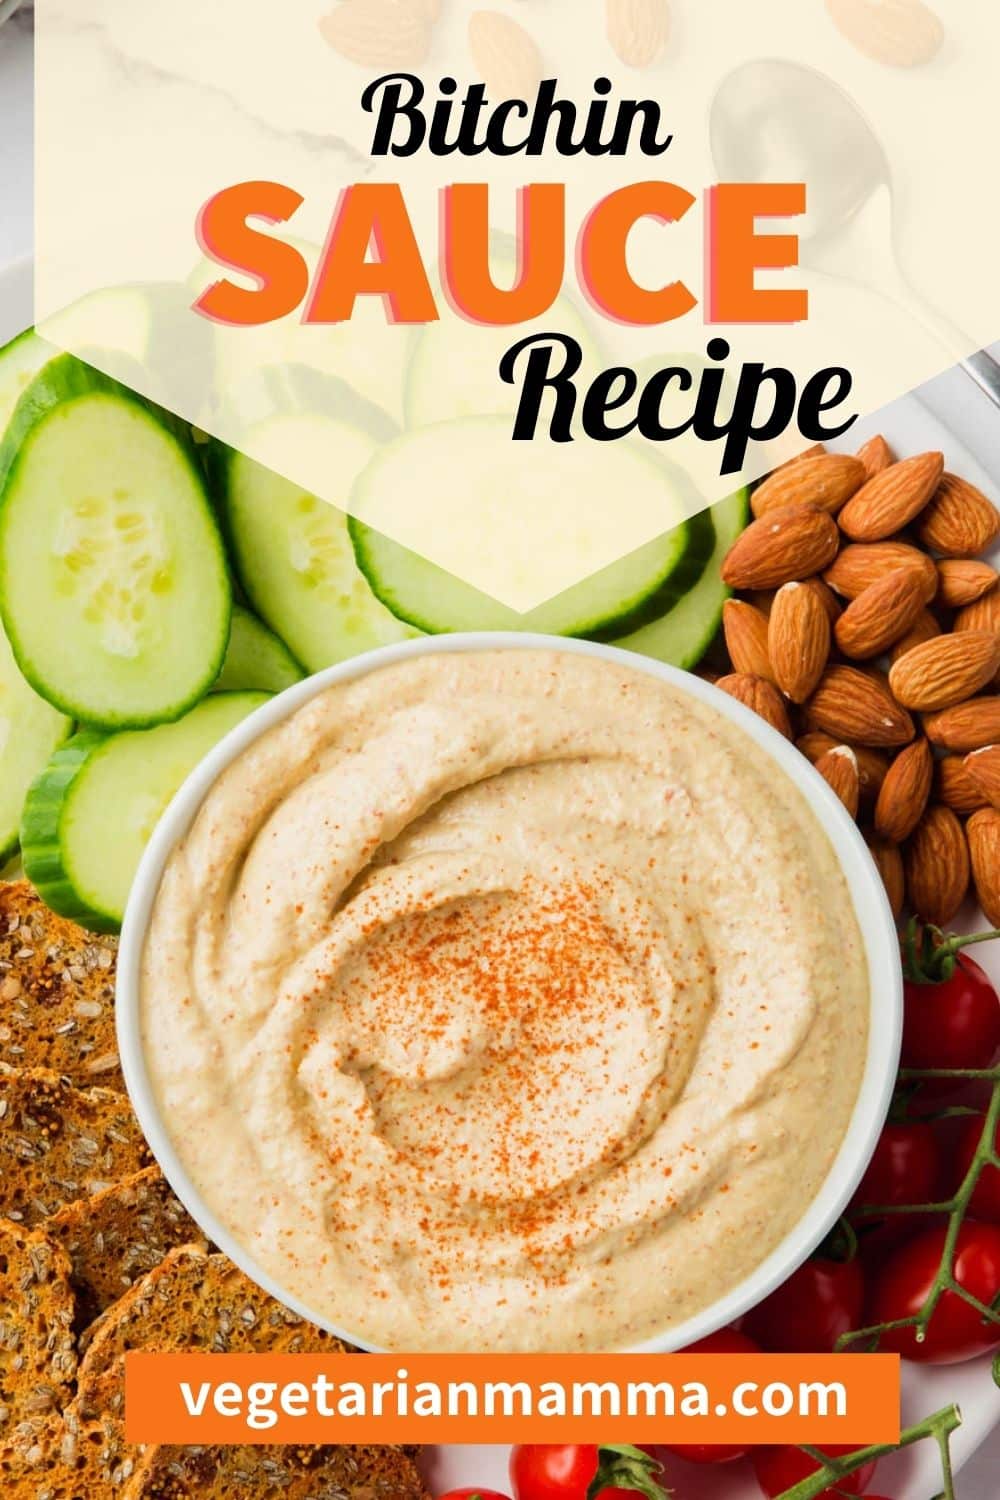 You are going to love this easy copycat recipe for replicating the original flavor Bitchin Sauce recipe at home! It's made from raw almonds and the perfect blend of seasonings.